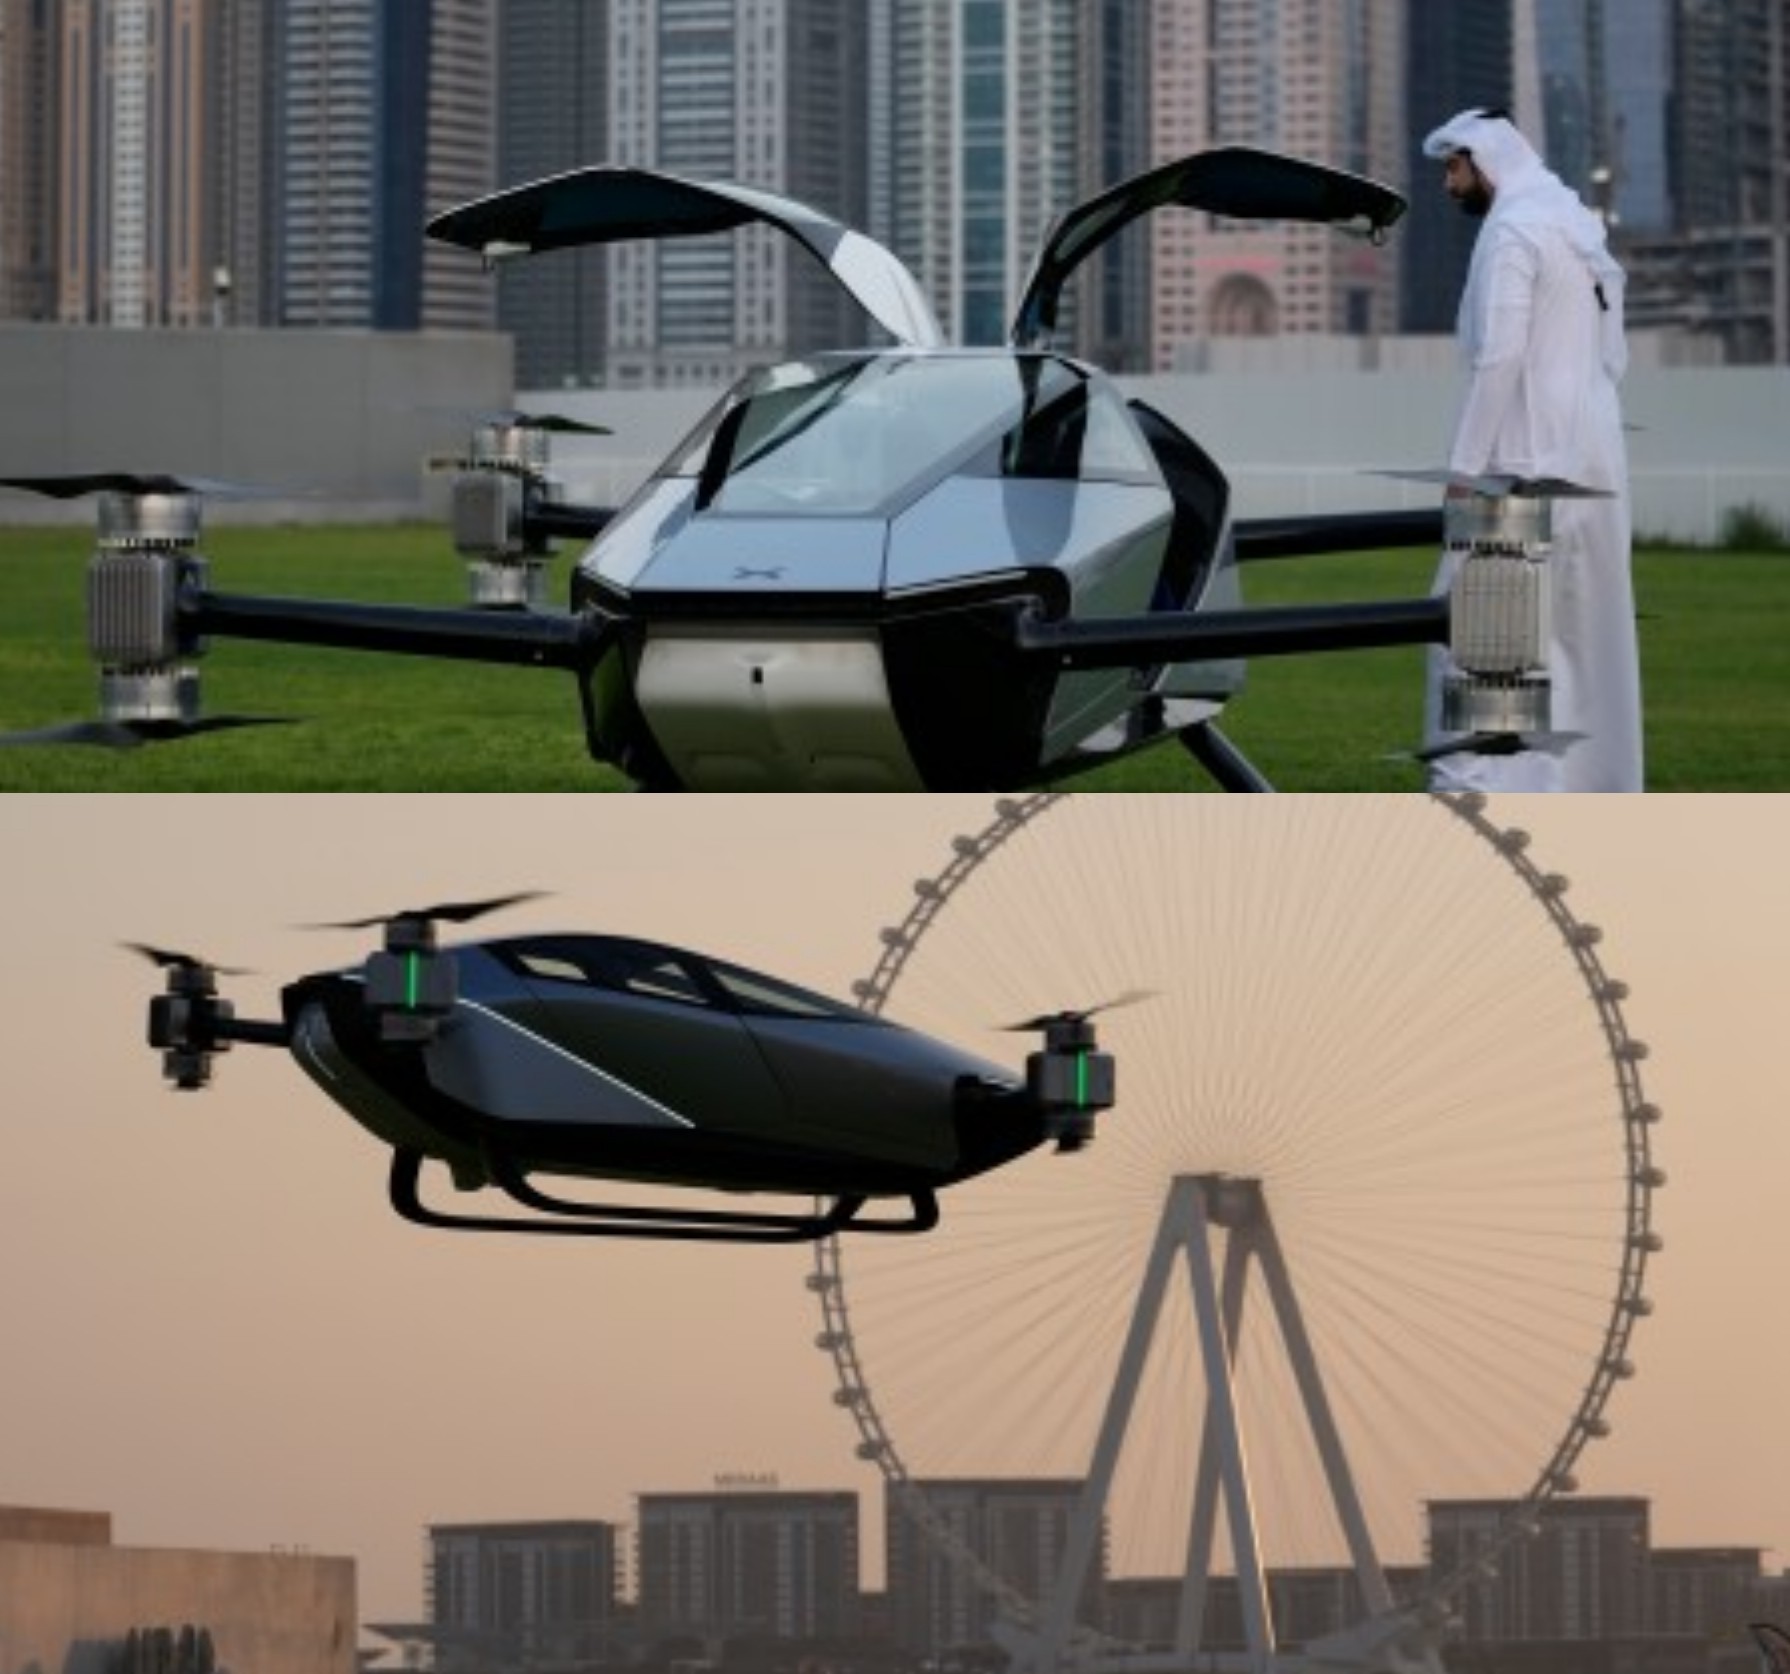 Chinese ‘flying car’ conducts its first public flight in Dubai